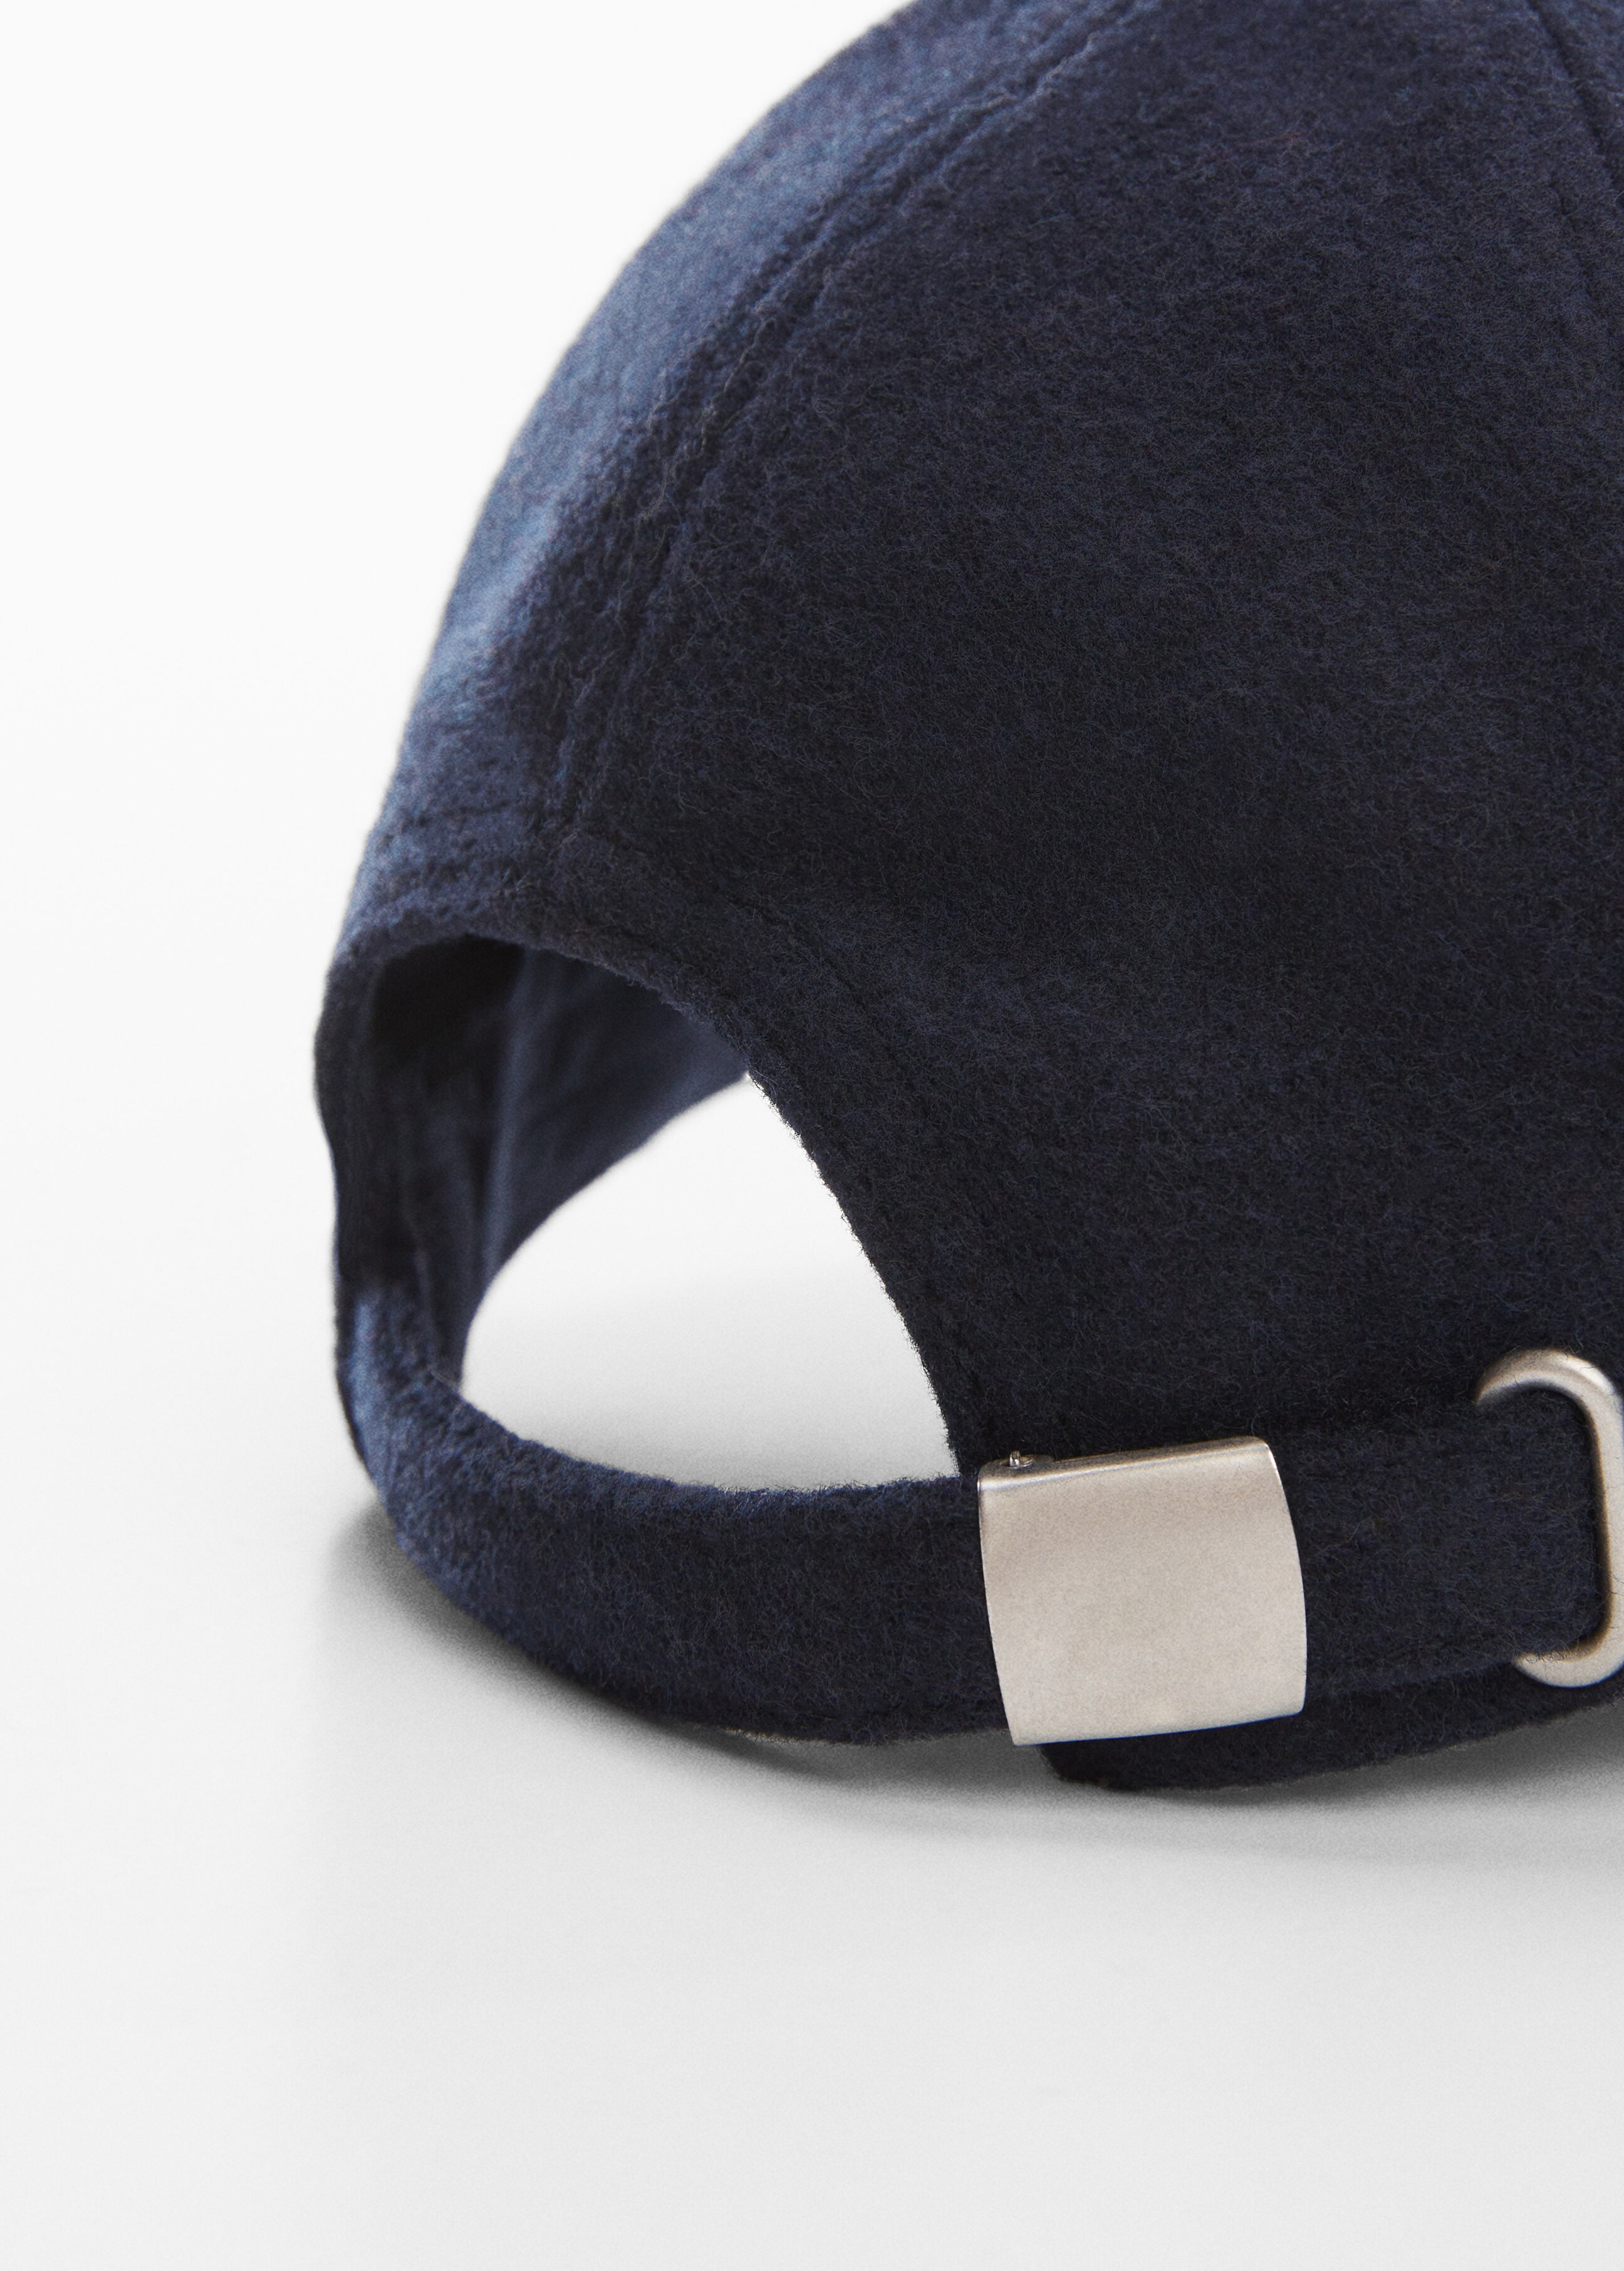 Embroidered detail cap - Details of the article 1